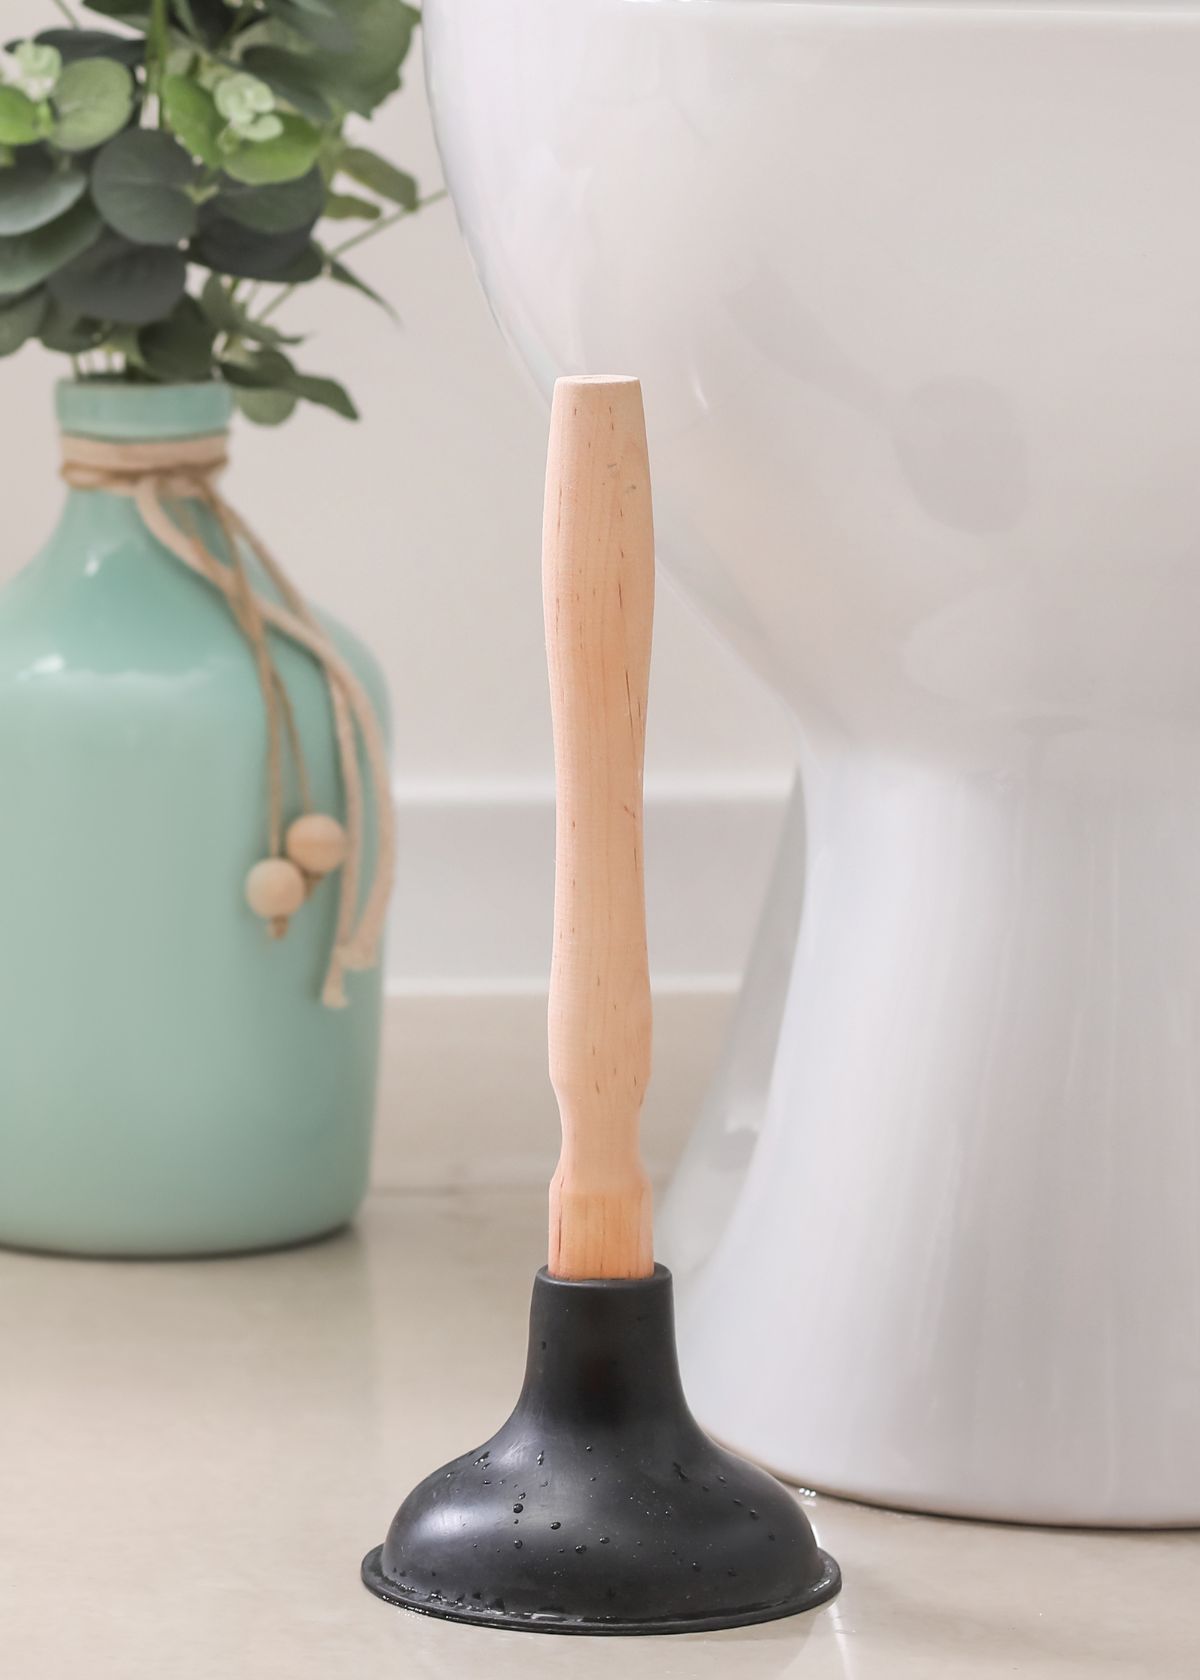 How to Clean a Toilet Plunger: 6 Methods